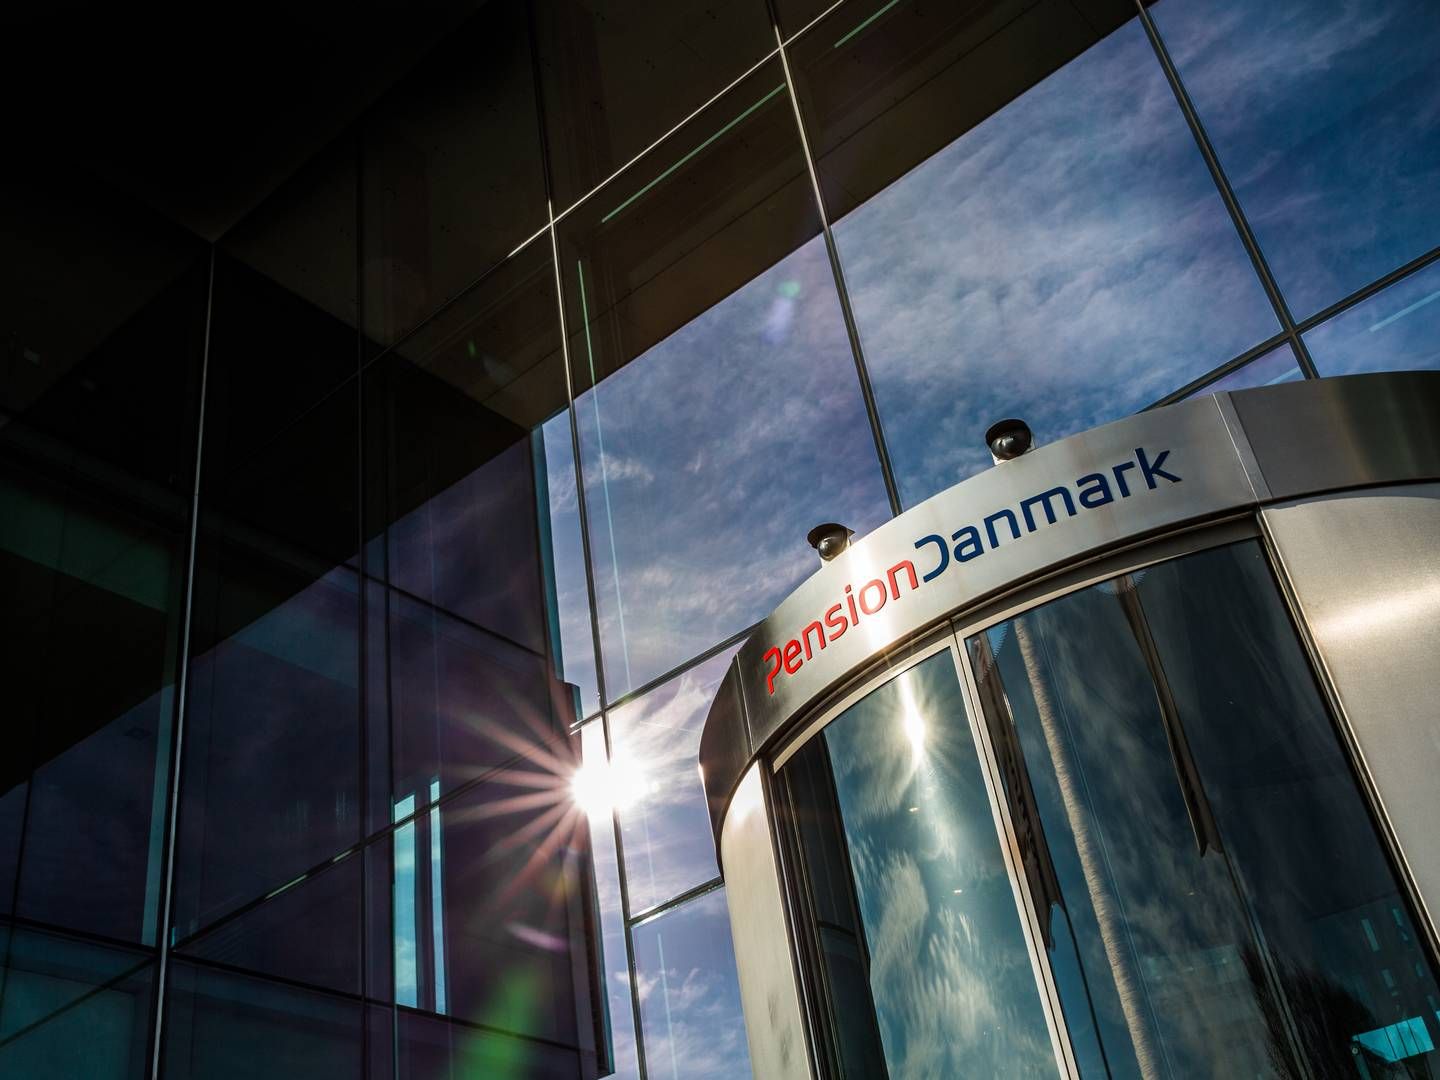 PensionDanmark has had Torben Möger Pedersen as CEO for the past 30 years. As he is now retiring, the boards of directors at PensionDanmark and Industriens Pension should consider the advantages of a merger, according to advisors. | Photo: Pensiondanmark/pr